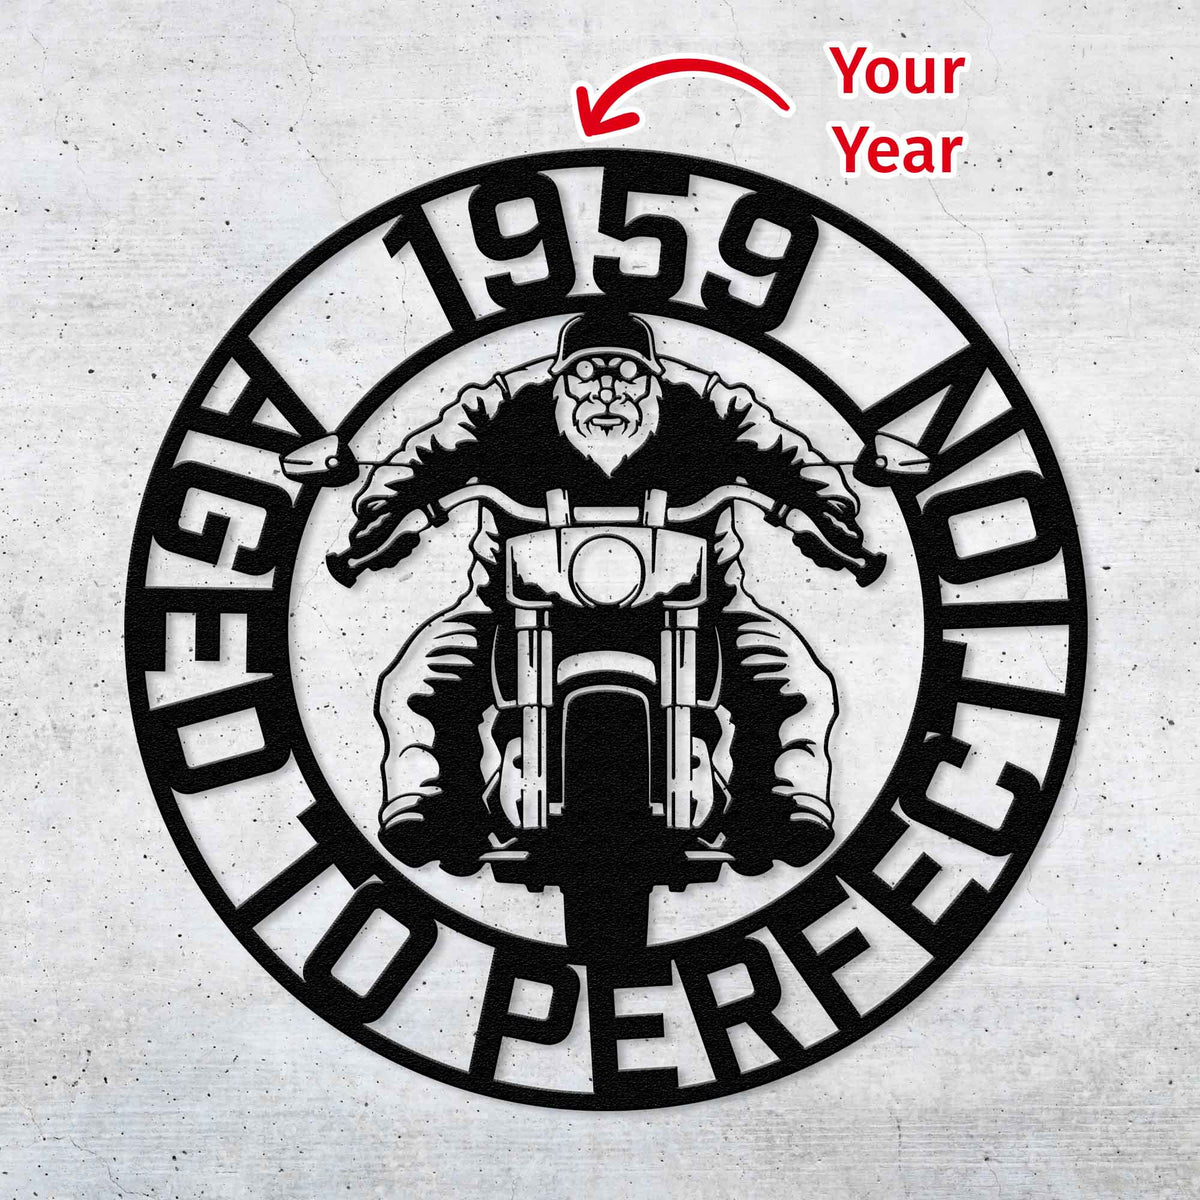 Biker Aged to Perfection - Personalized Metal Wall Art Metal Art - Throttle Mania